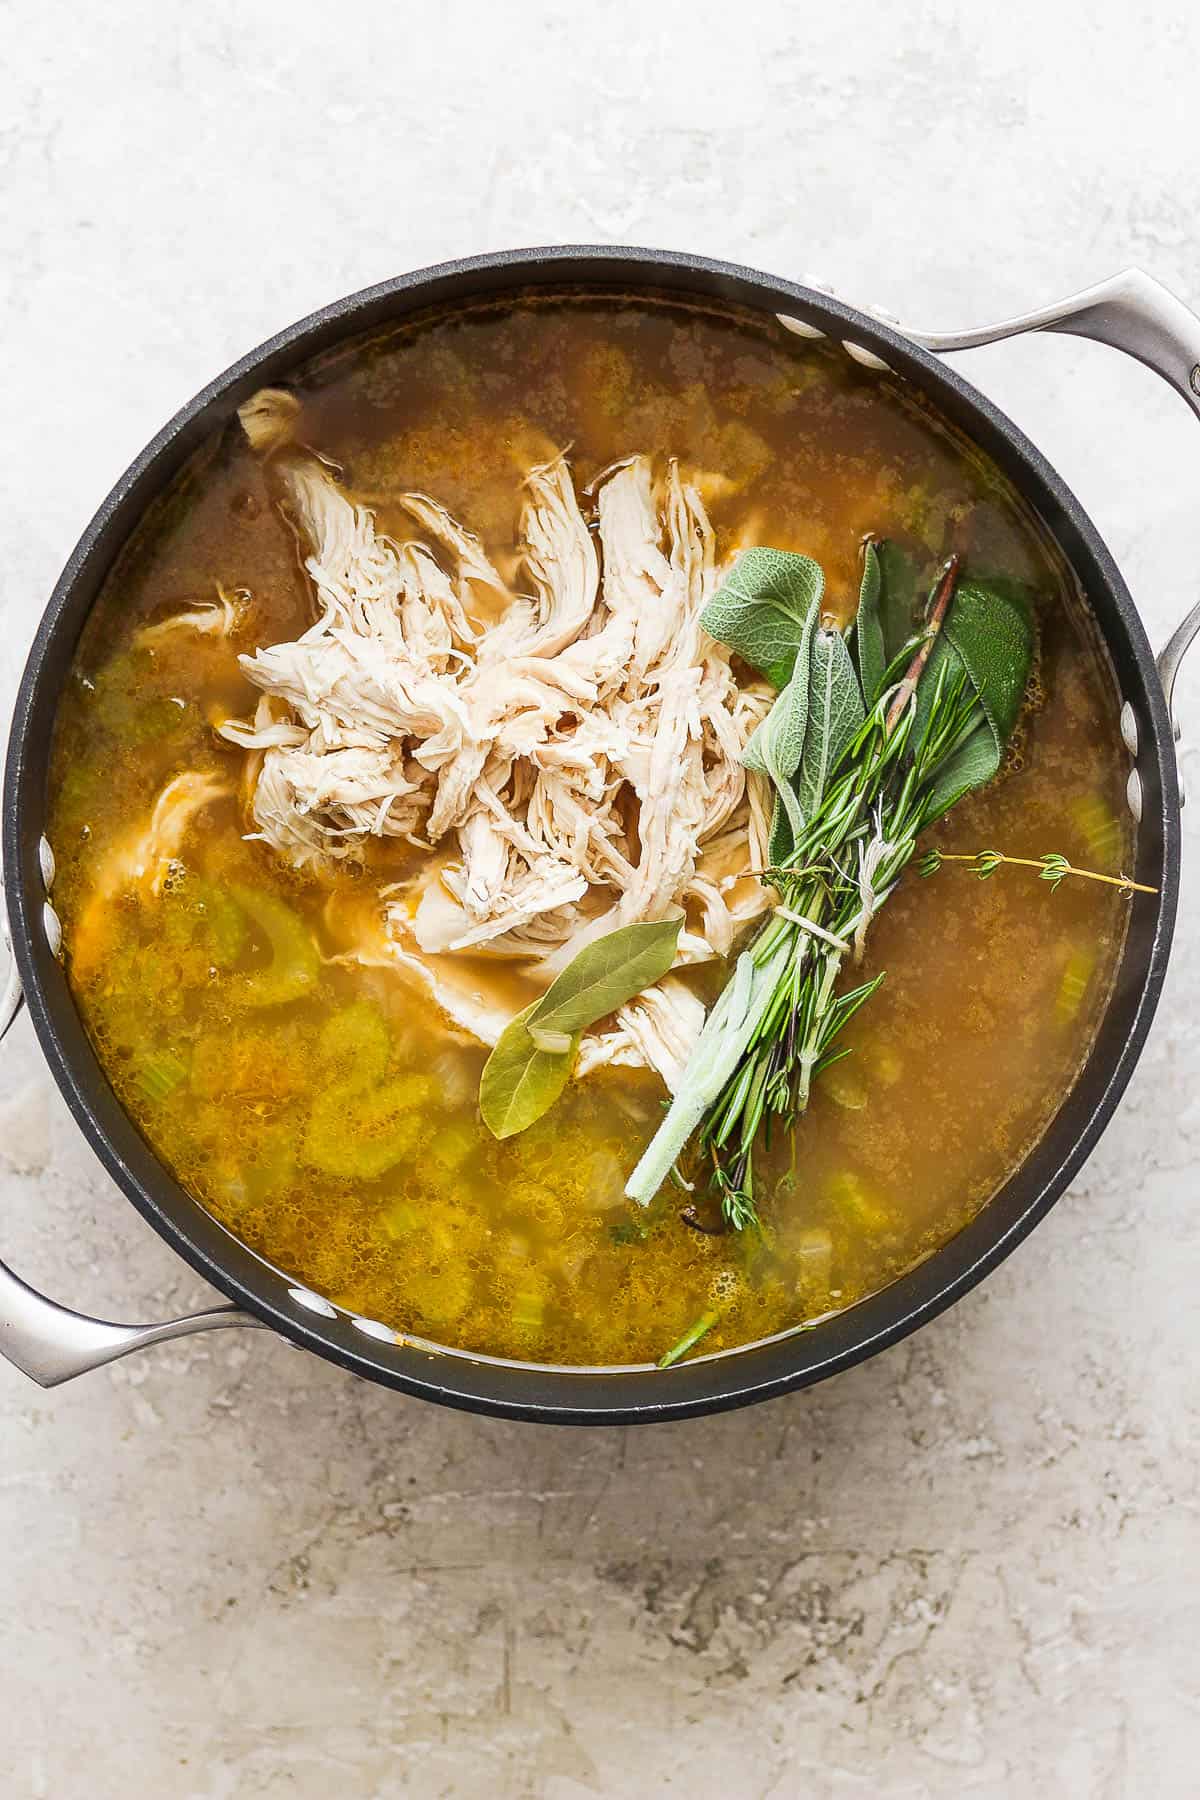 Shredded chicken added back to the broth and vegetables along with bay leaves, herb bundle, smashed garlic, and lemon zest.